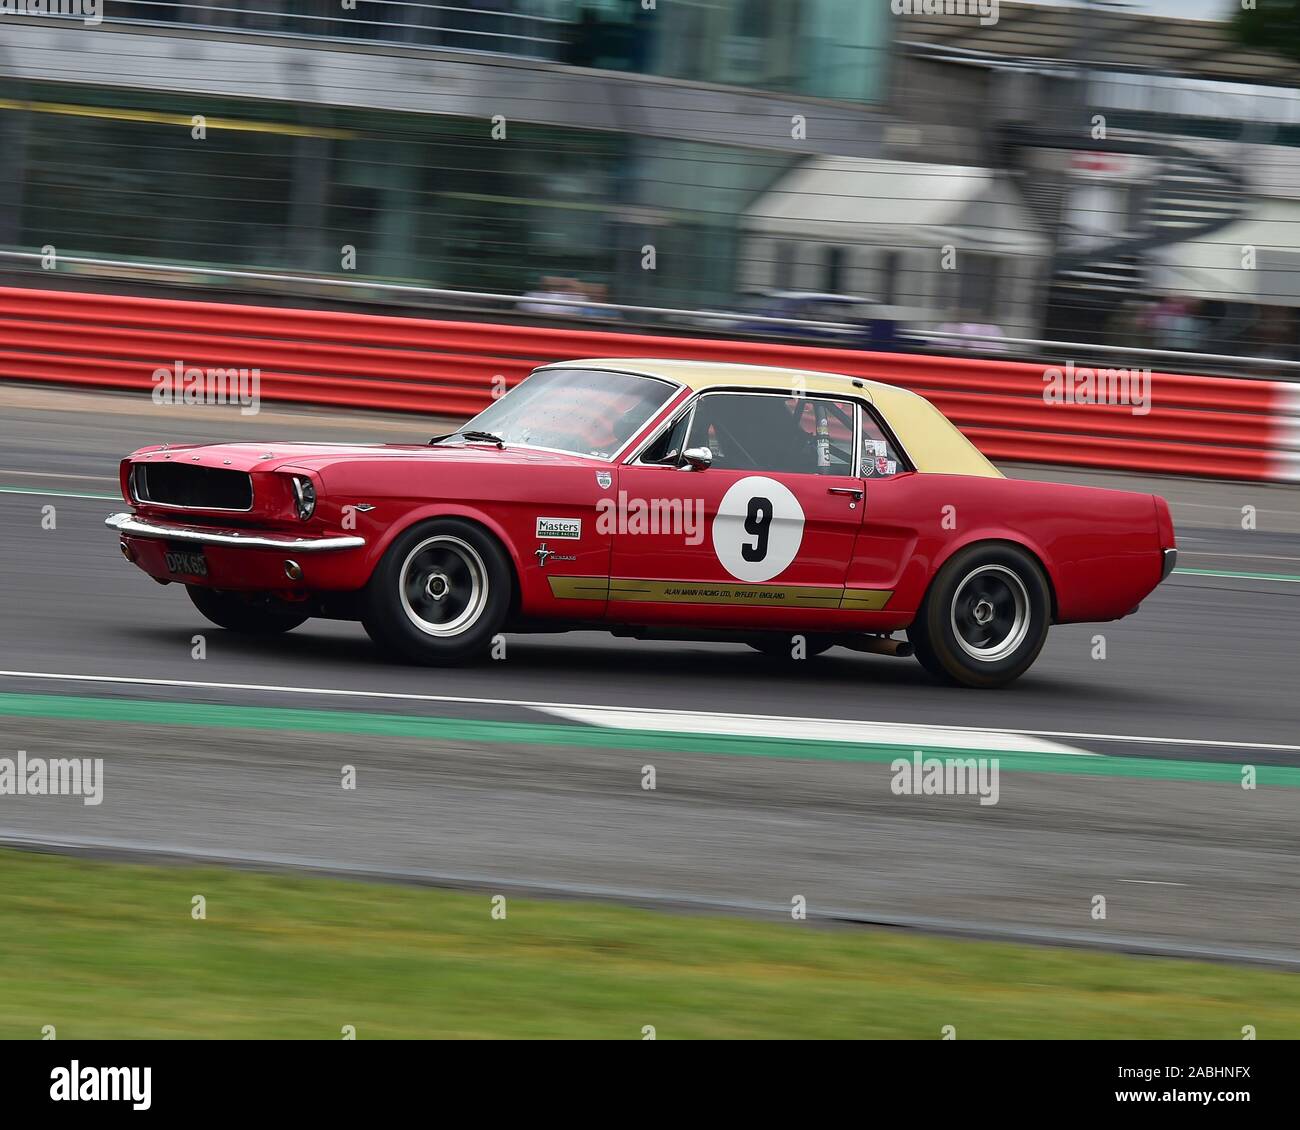 Craig Davies, Ford Mustang, Transatlantic Trophy for Pre '66 Touring Cars, Silverstone Classic, July 2019, Silverstone, Northamptonshire, England, cir Stock Photo